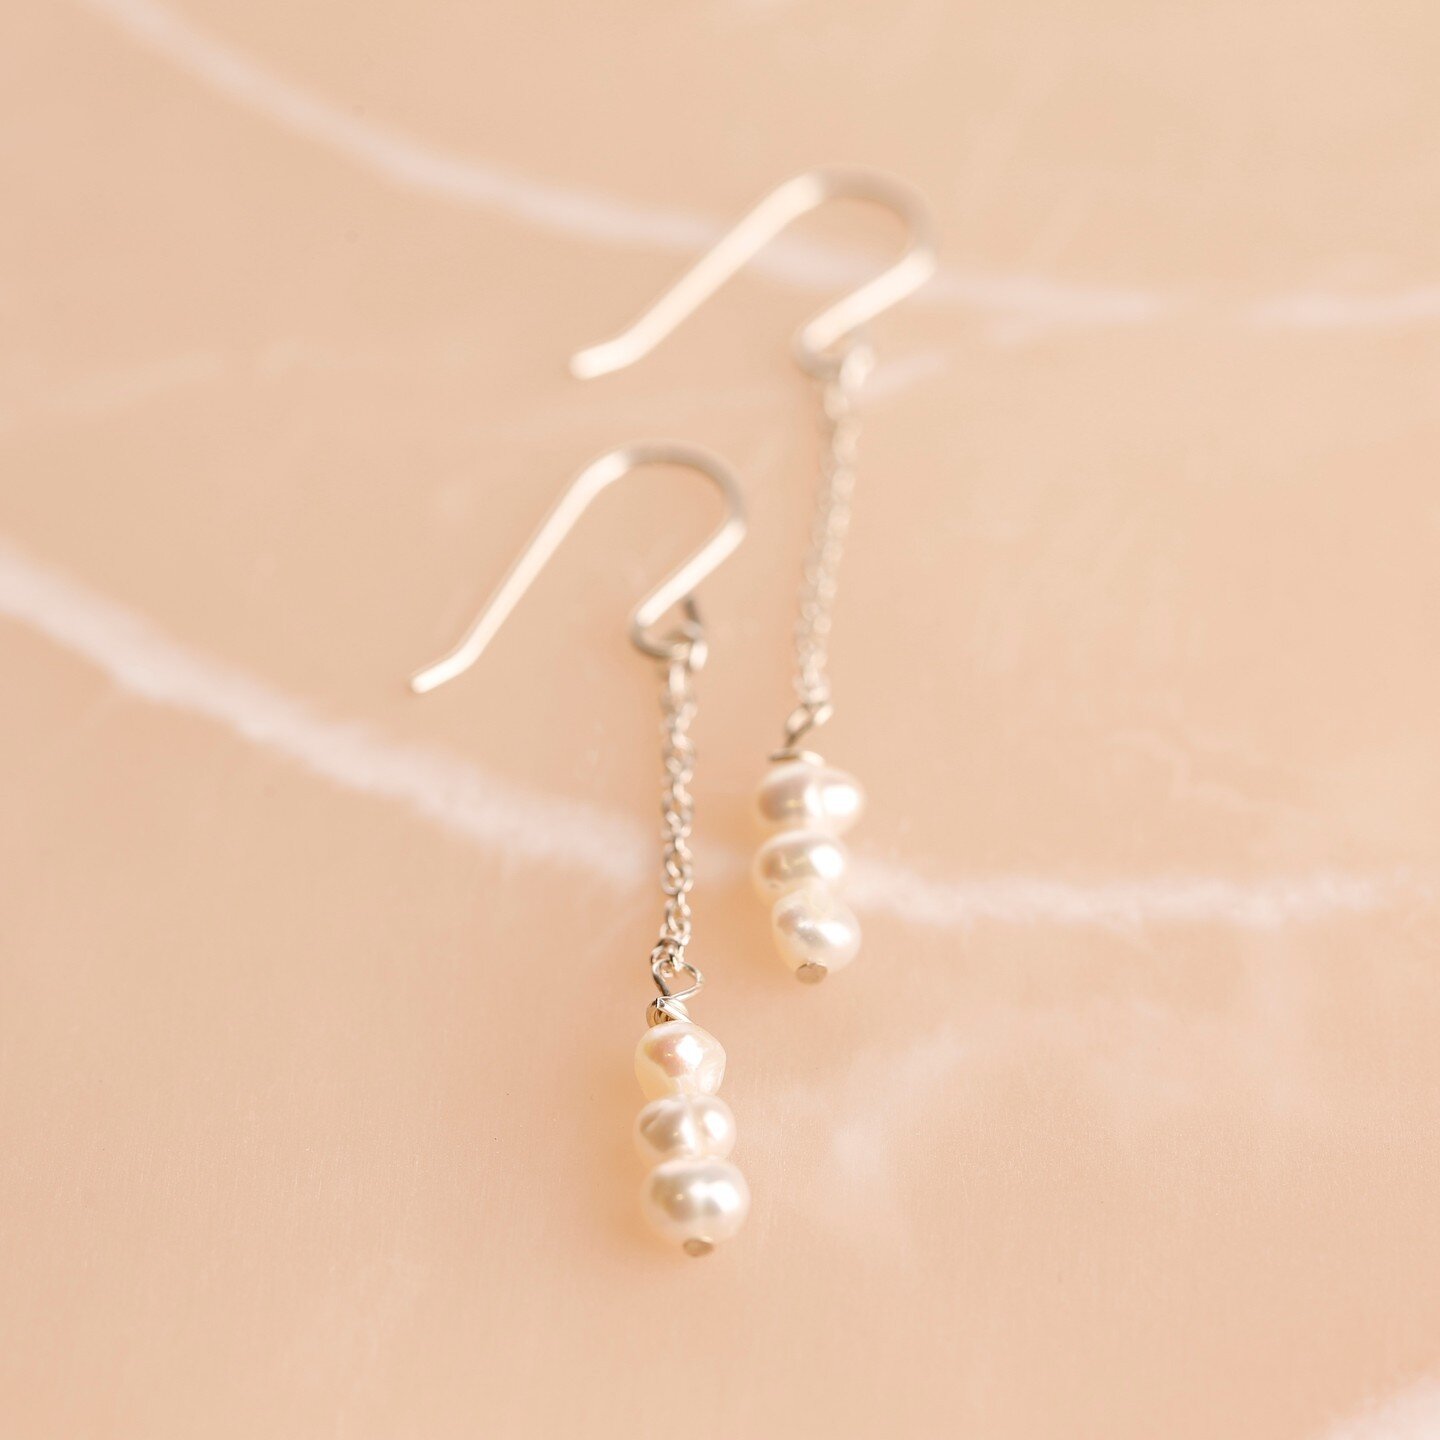 Pearls are a favourite go to to wear on days when I feel a little messy.⁠
⁠
Pearls have been associated with femininity, purity, wisdom, patience, and peace. These lovelies just sing strong, yet delicate beauty.⁠
⁠
I have named these after Cleopatra,